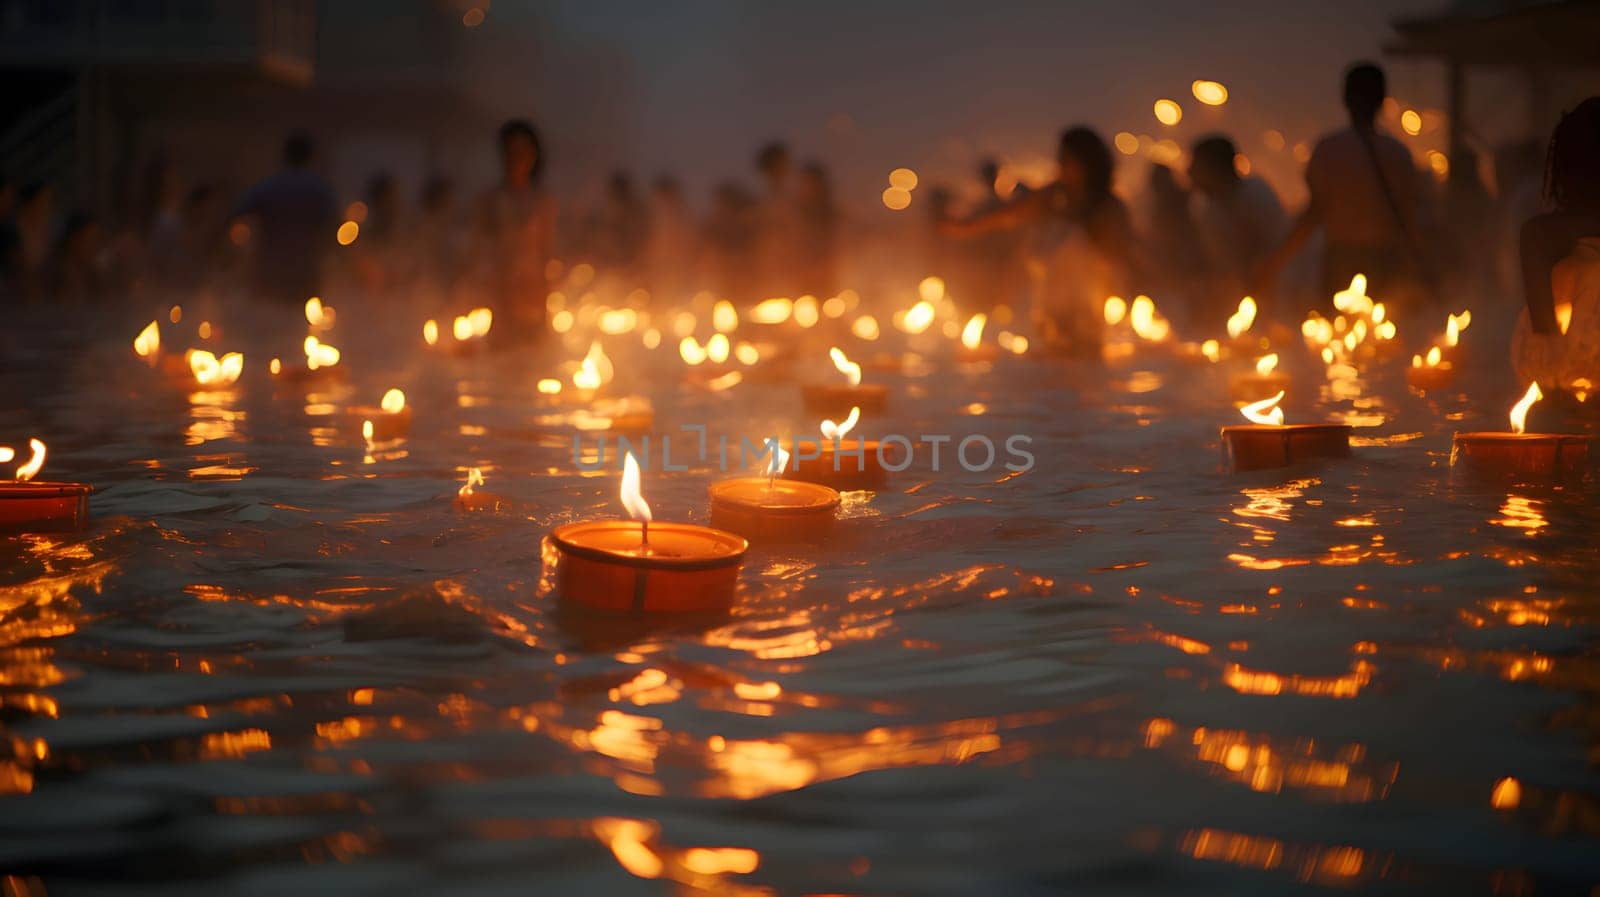 Candle lanterns floating on water. Diwali, the dipawali Indian festival of light. An atmosphere of joy and celebration.